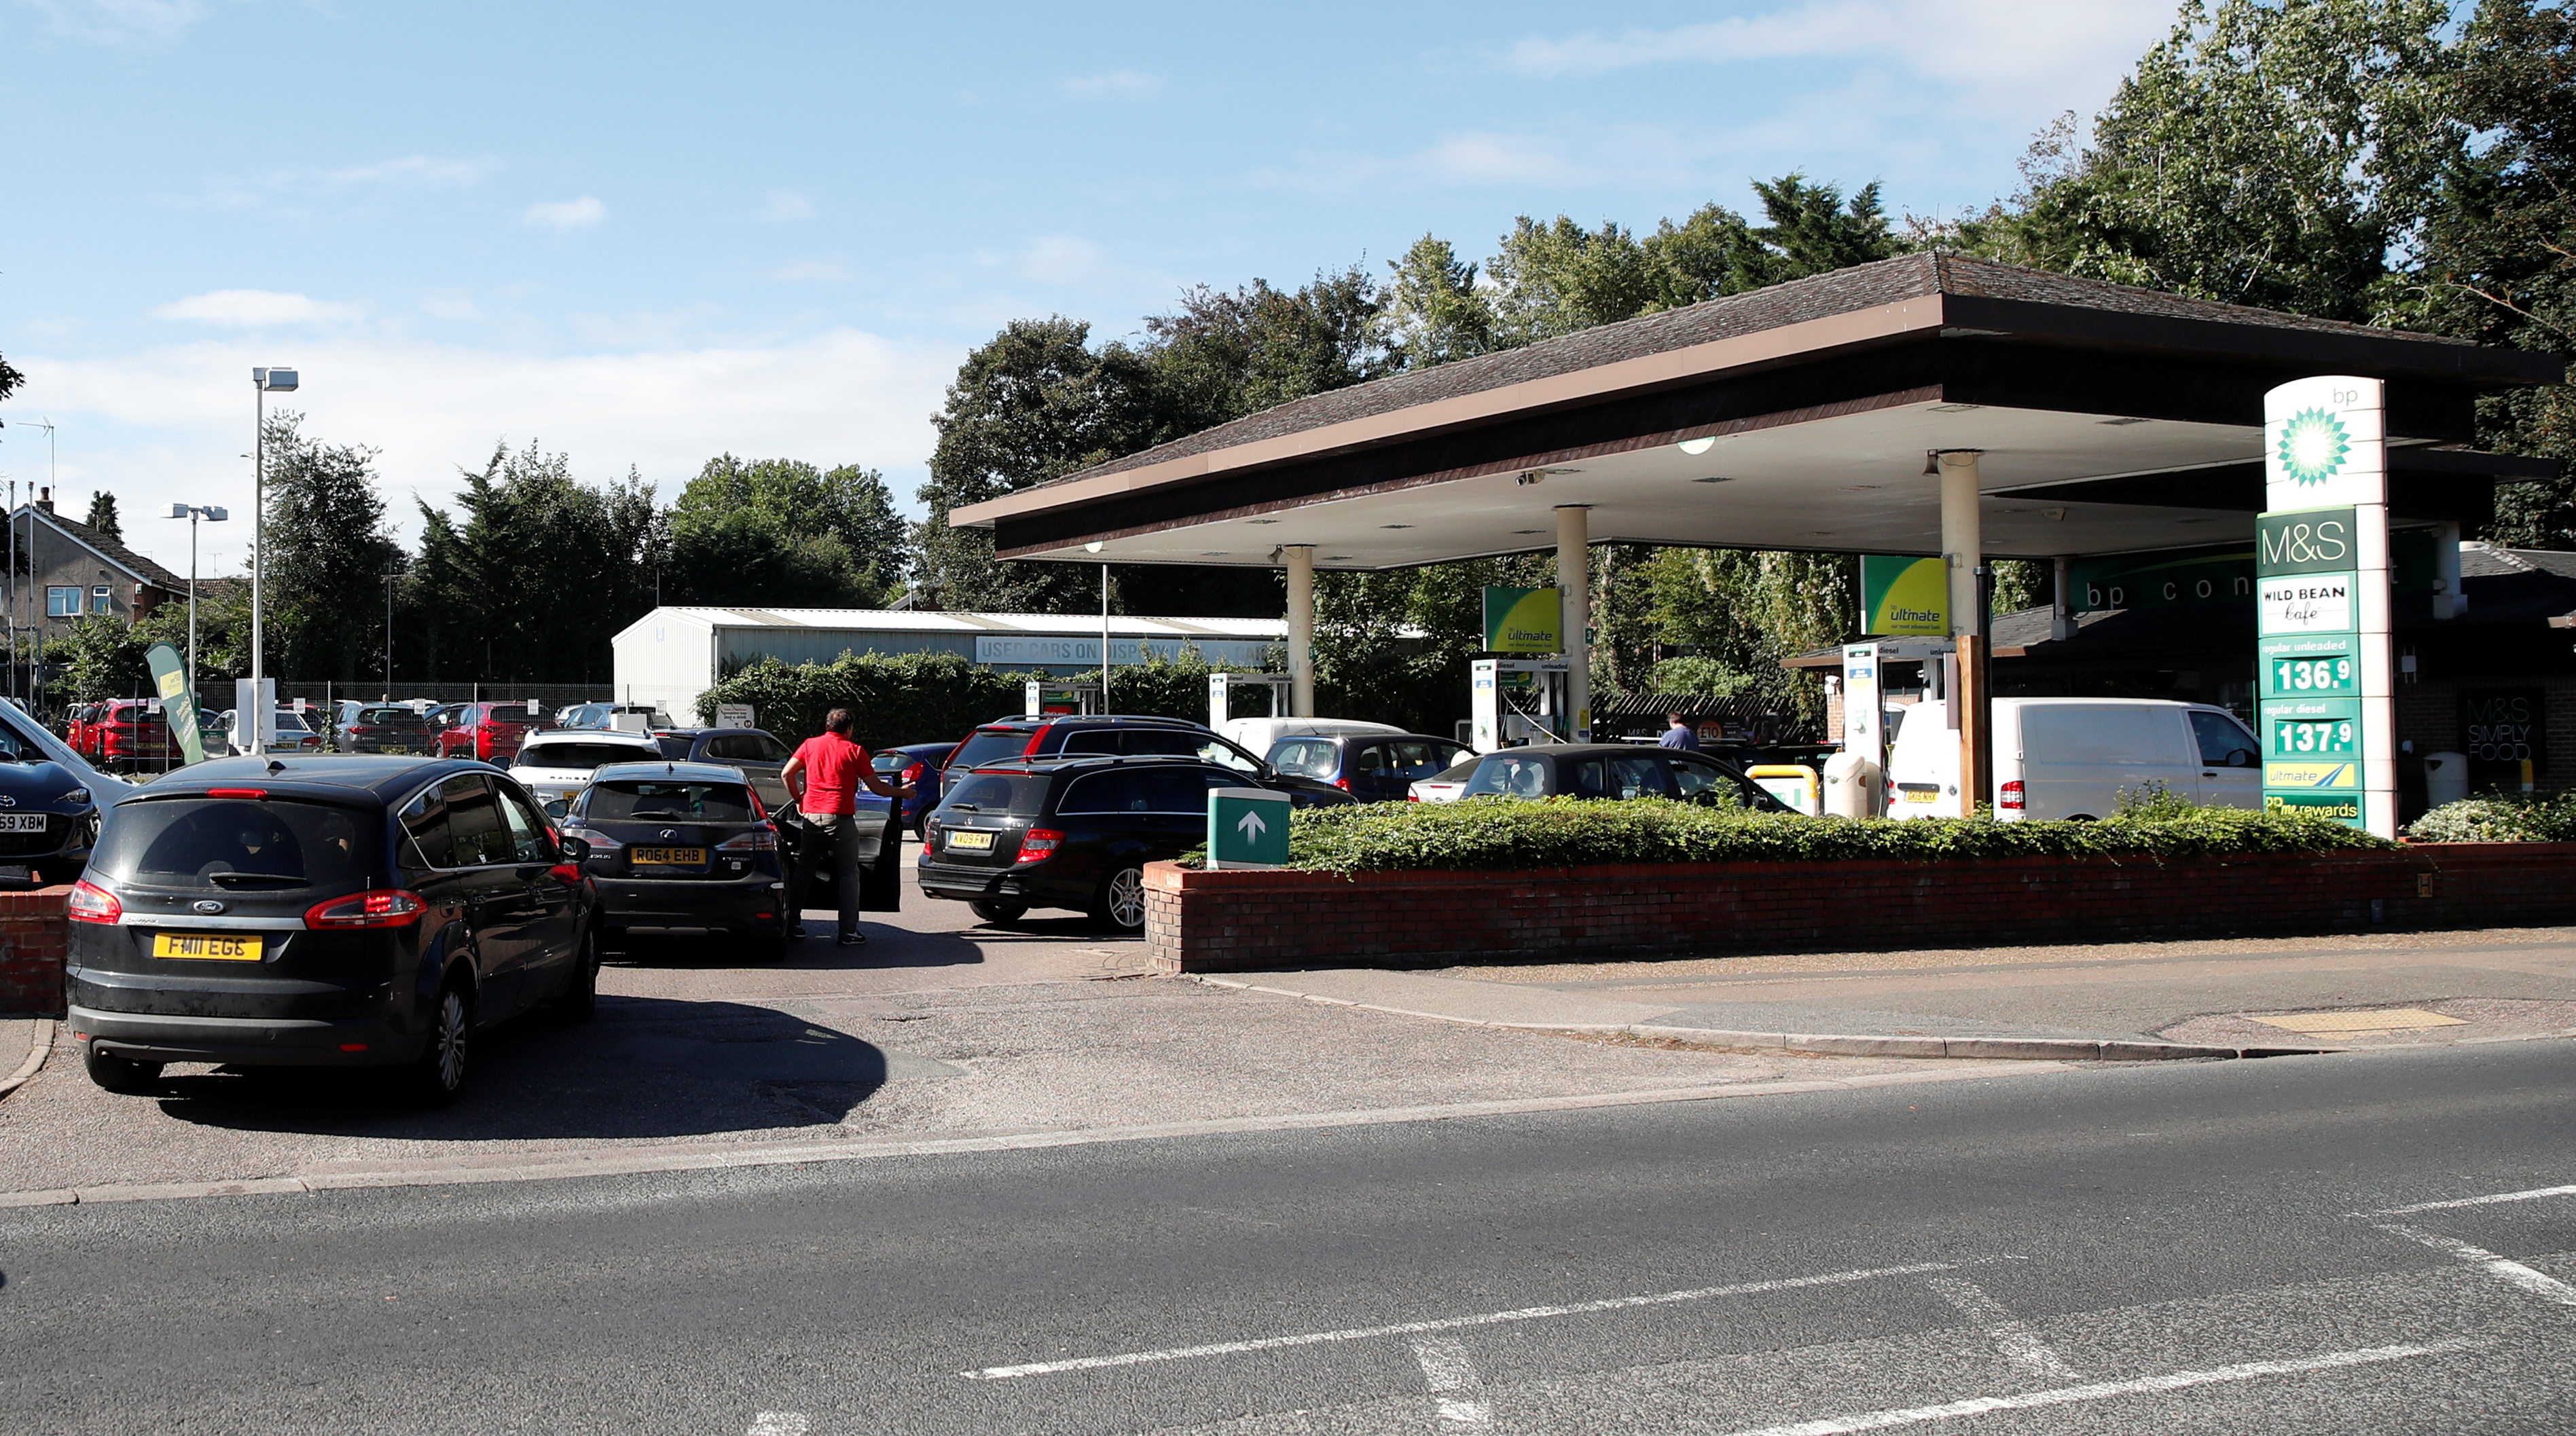 Vehicles queue up to enter the BP petrol station, in Harpenden